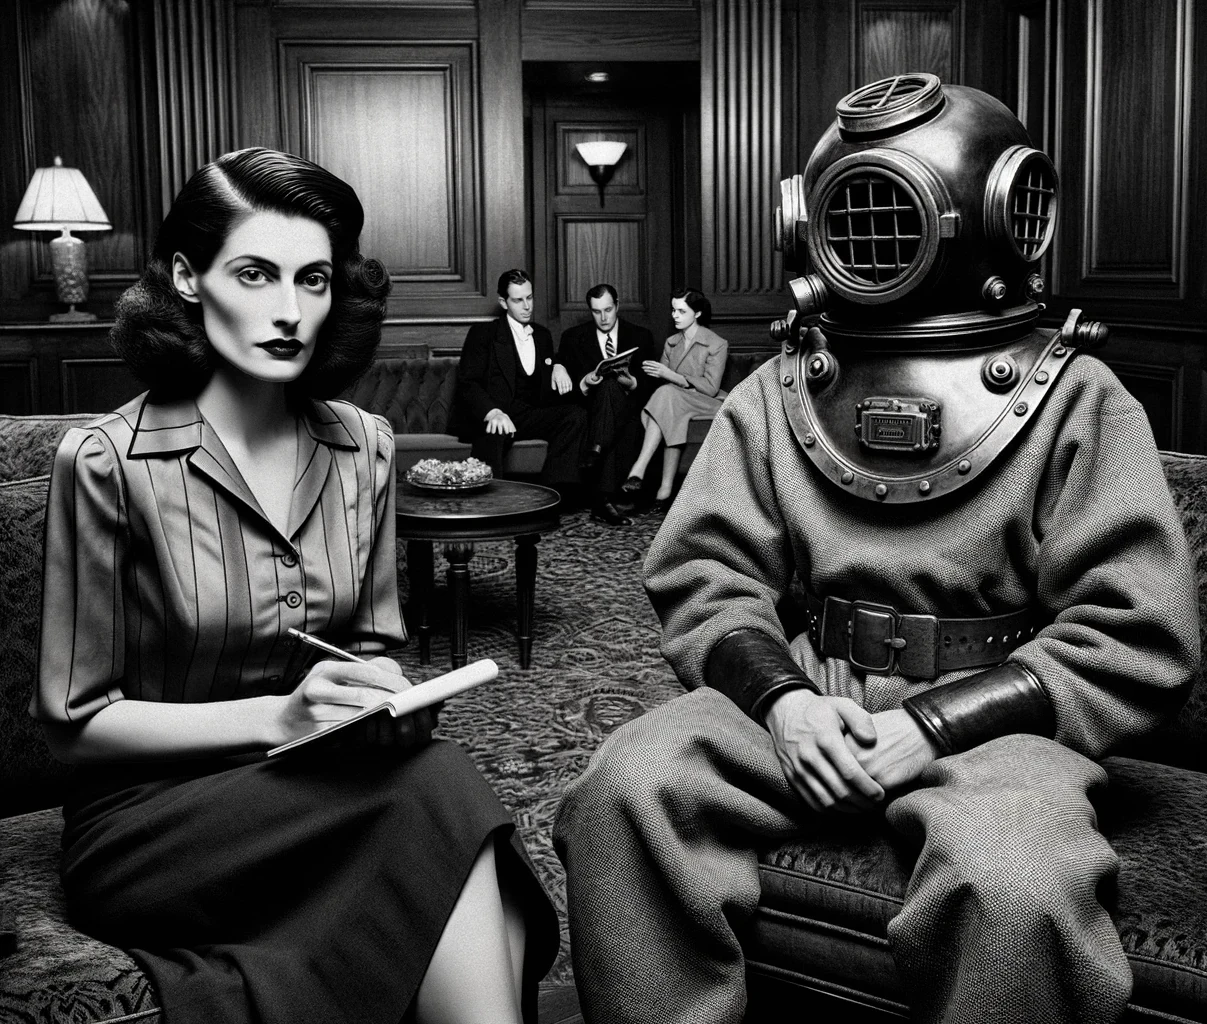 Ayn Rand and Hank Gruberson, famous deep sea mining entrepreneur, sit down in a New York club for an interview